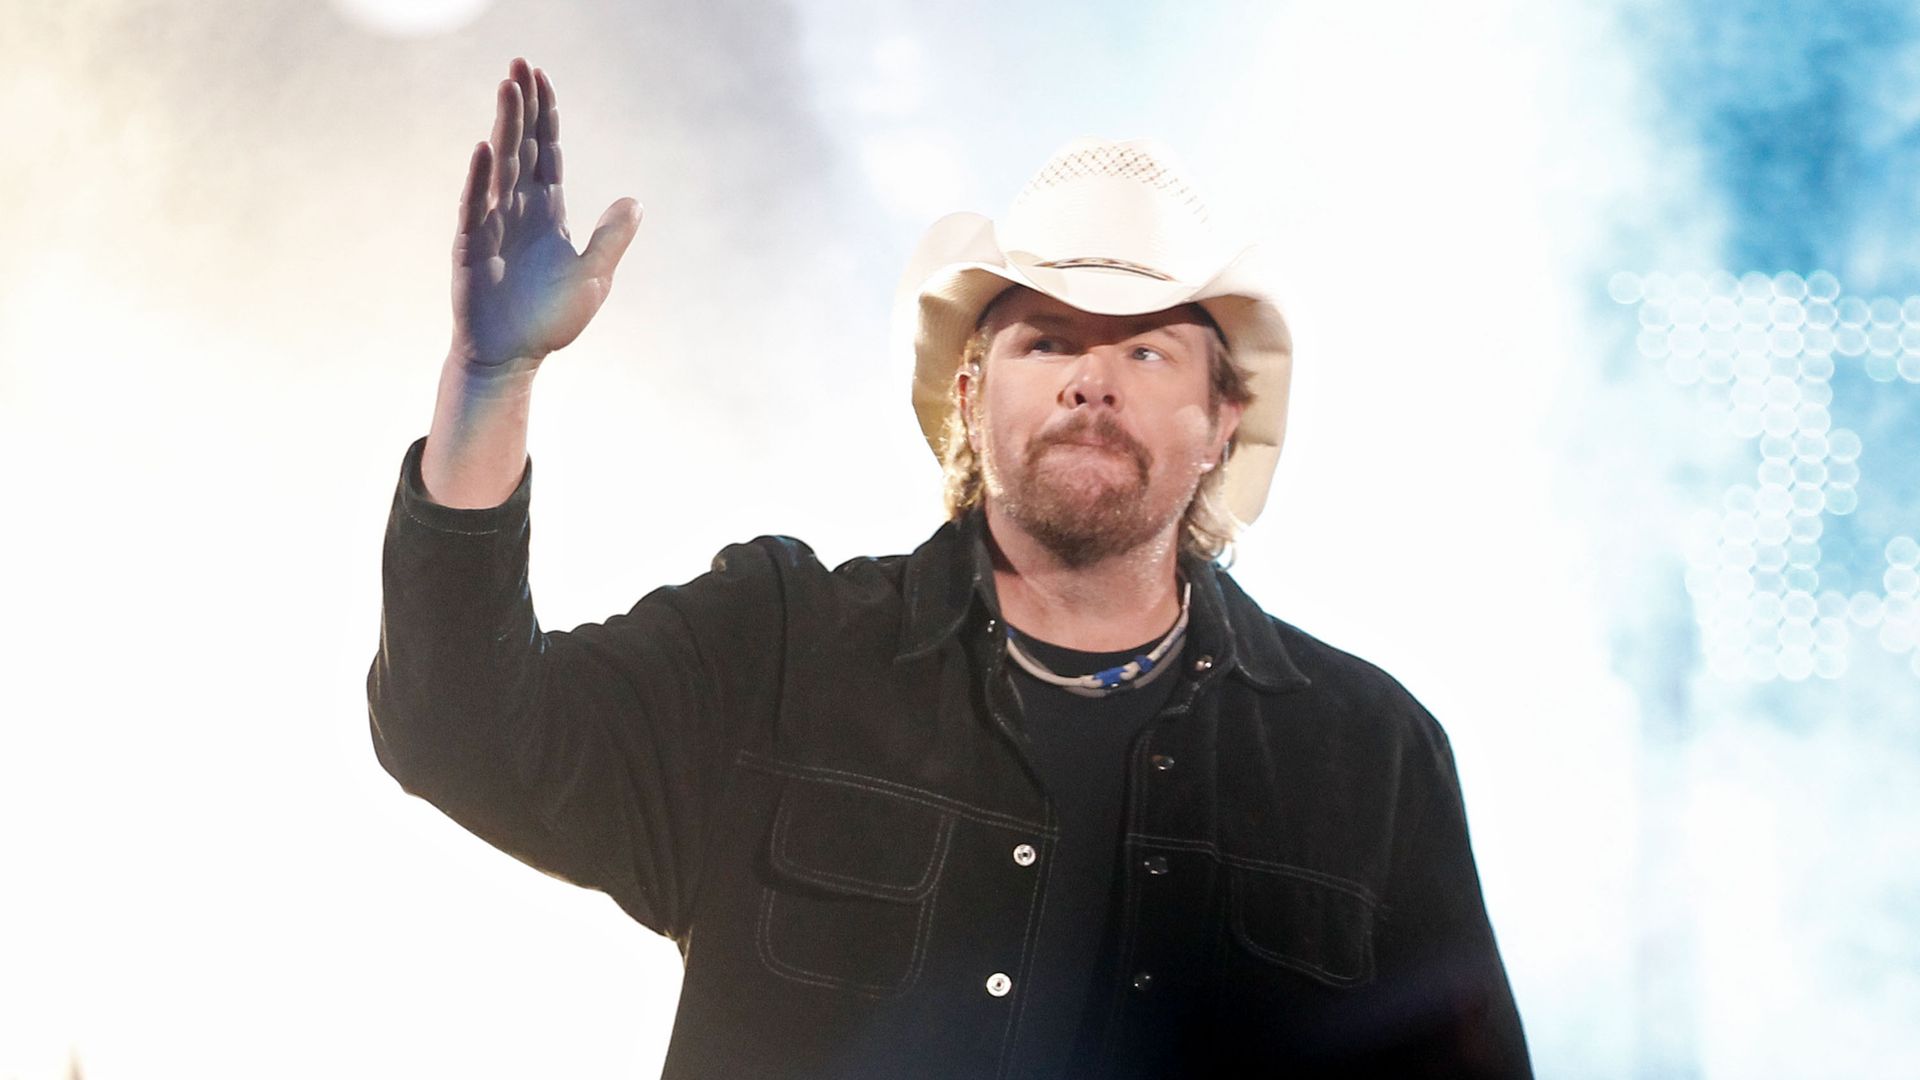 Musician Toby Keith accepts the Artist of the Decade Award onstage at the American Country Awards 2011 at the MGM Grand Garden Arena on December 5, 2011 in Las Vegas, Nevada.